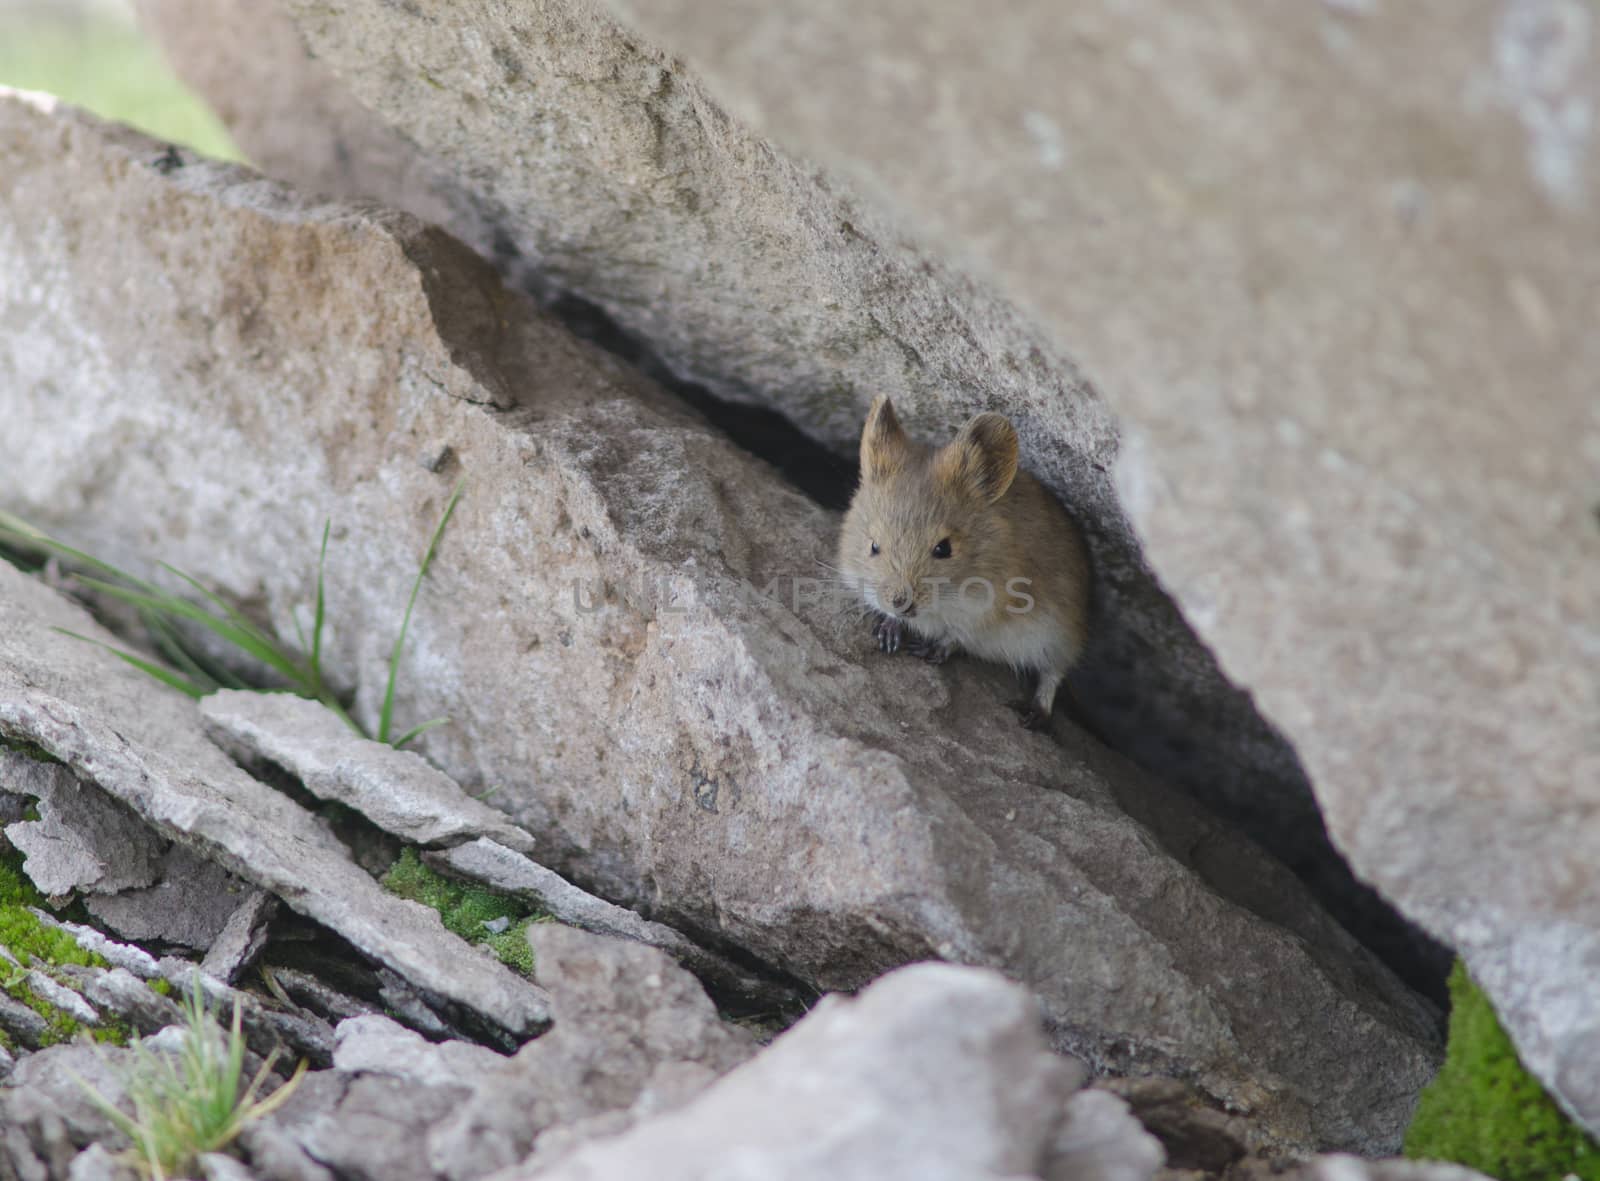 Bolivian big-eared mouse Auliscomys boliviensis at the entrance to the den. by VictorSuarez